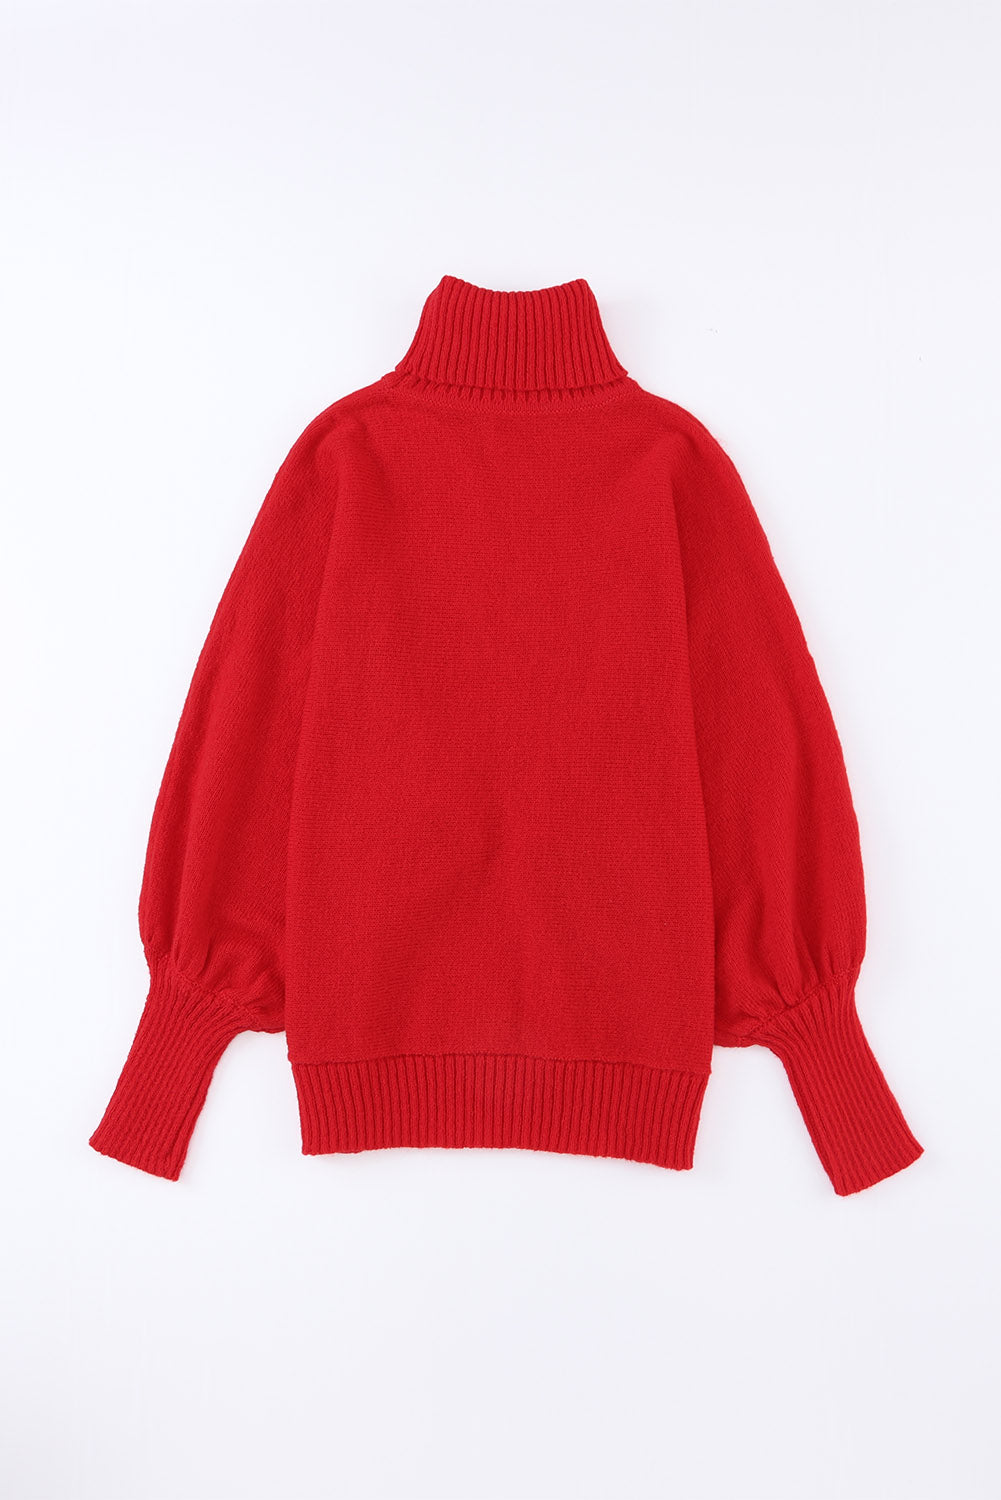 Racing Red Love Letter Print Turtleneck Batwing Sleeve Sweater